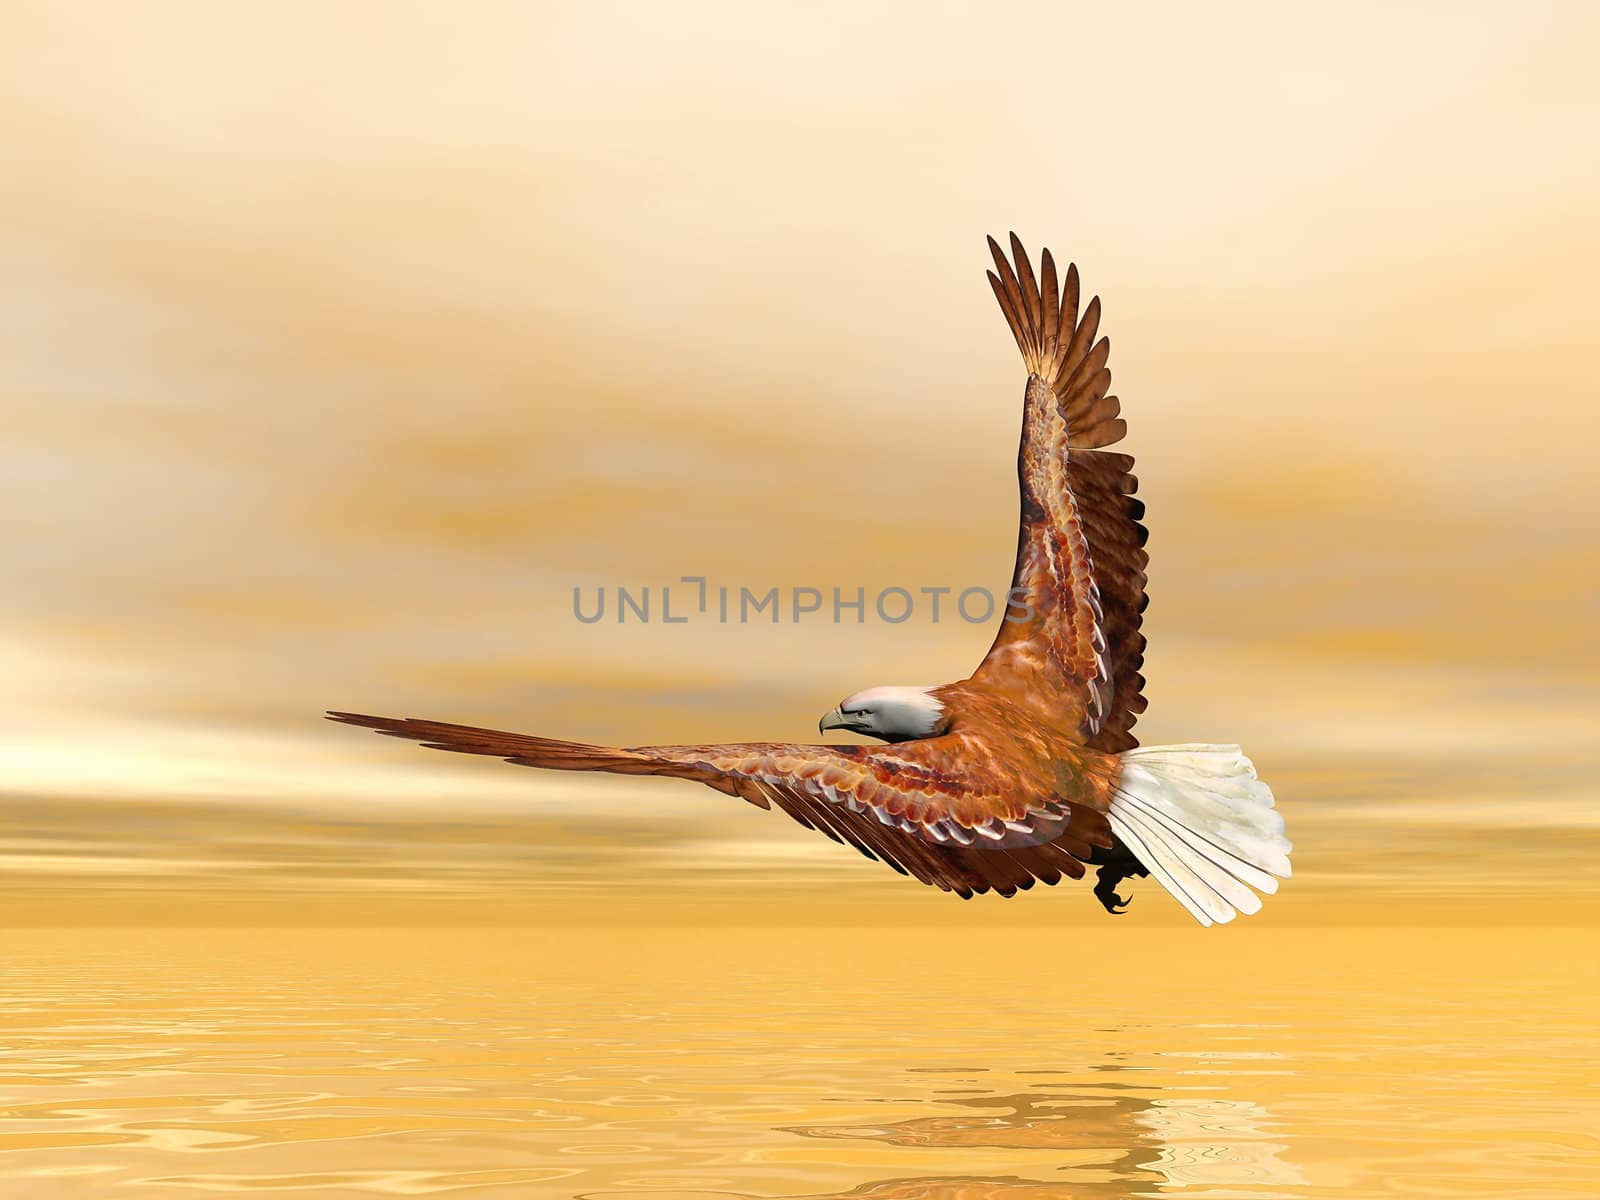 Eagle flying - 3D render by Elenaphotos21